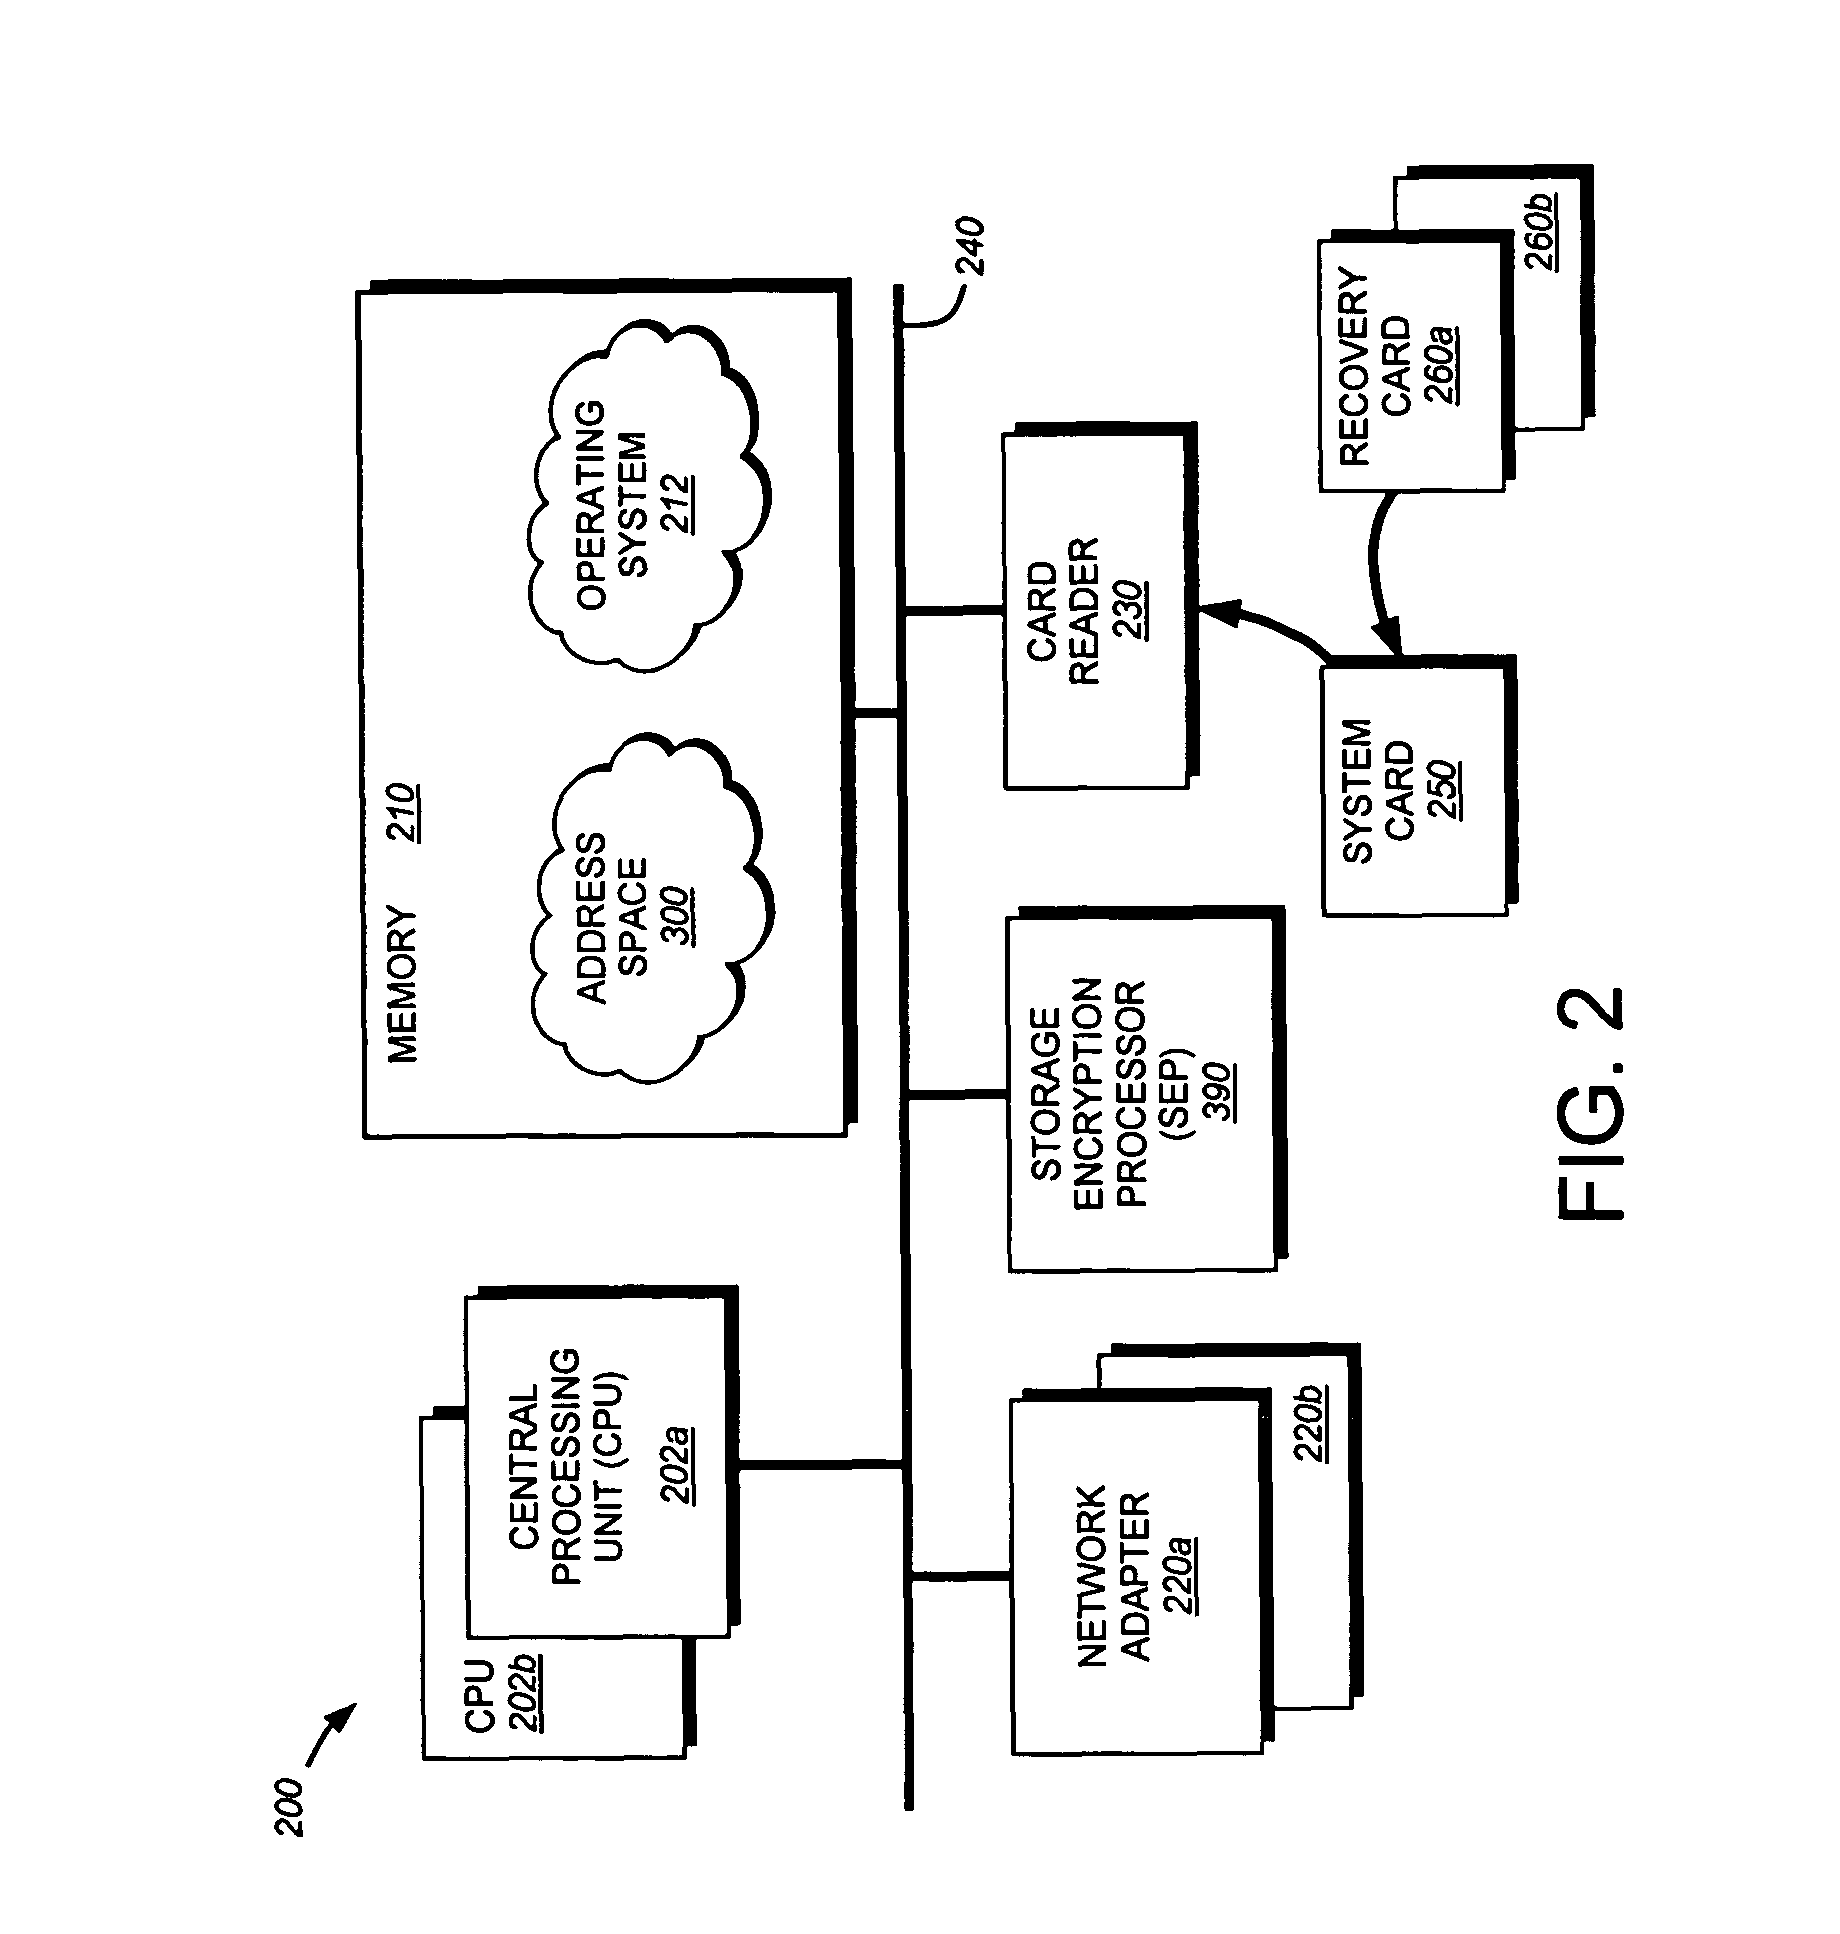 System and method for initial key establishment using a split knowledge protocol